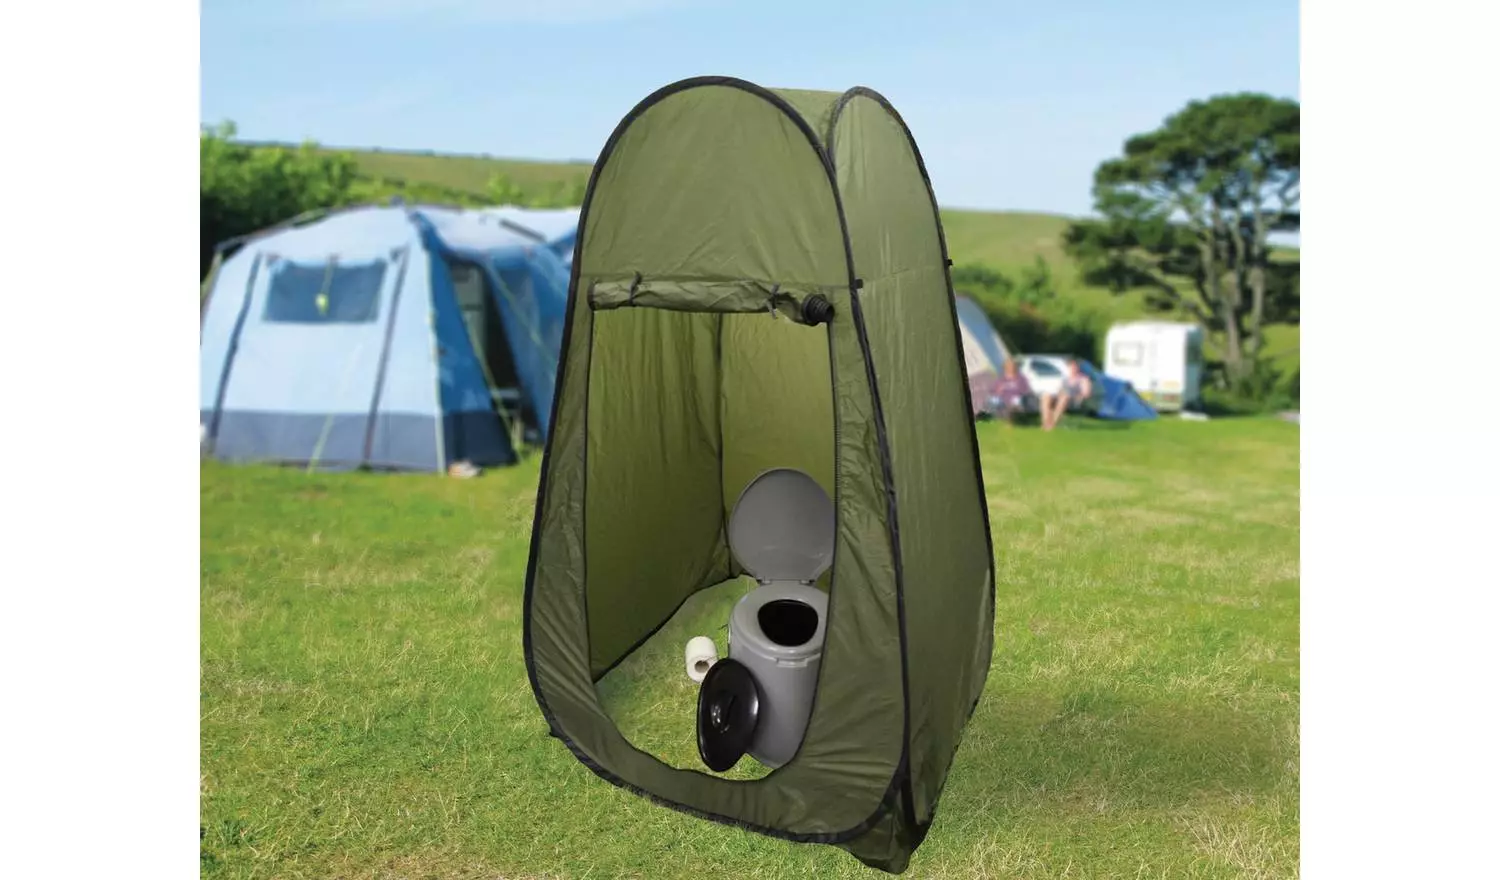 eisurewize Need A Loo Excel Portable Camping Toilet, £24.99, pictured inside a pop-up tent.